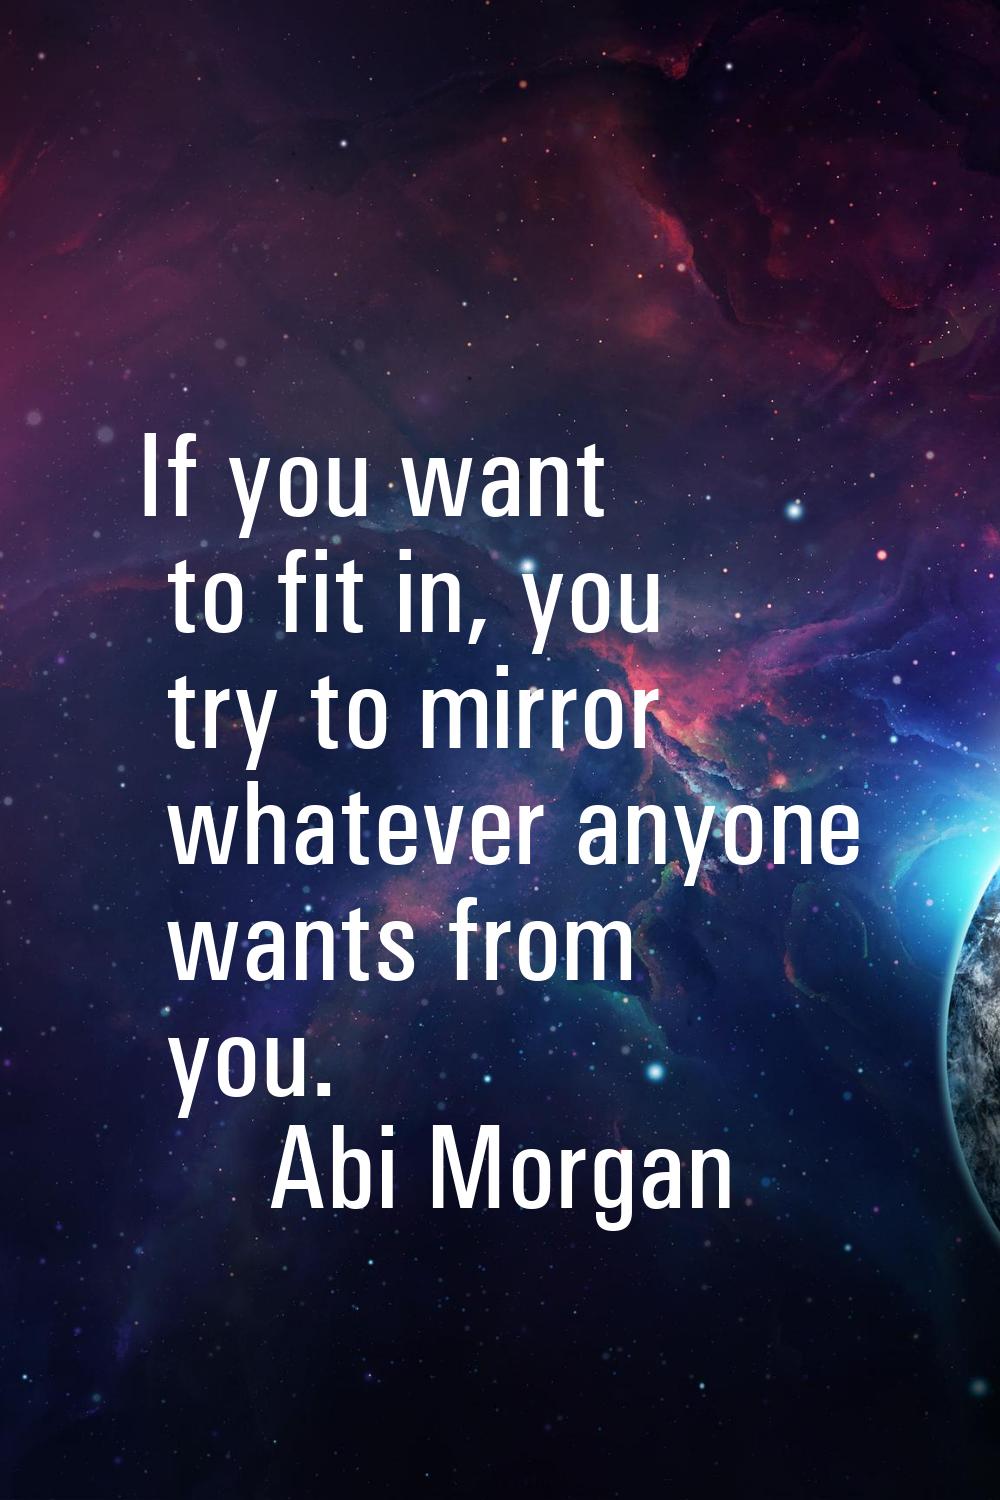 If you want to fit in, you try to mirror whatever anyone wants from you.